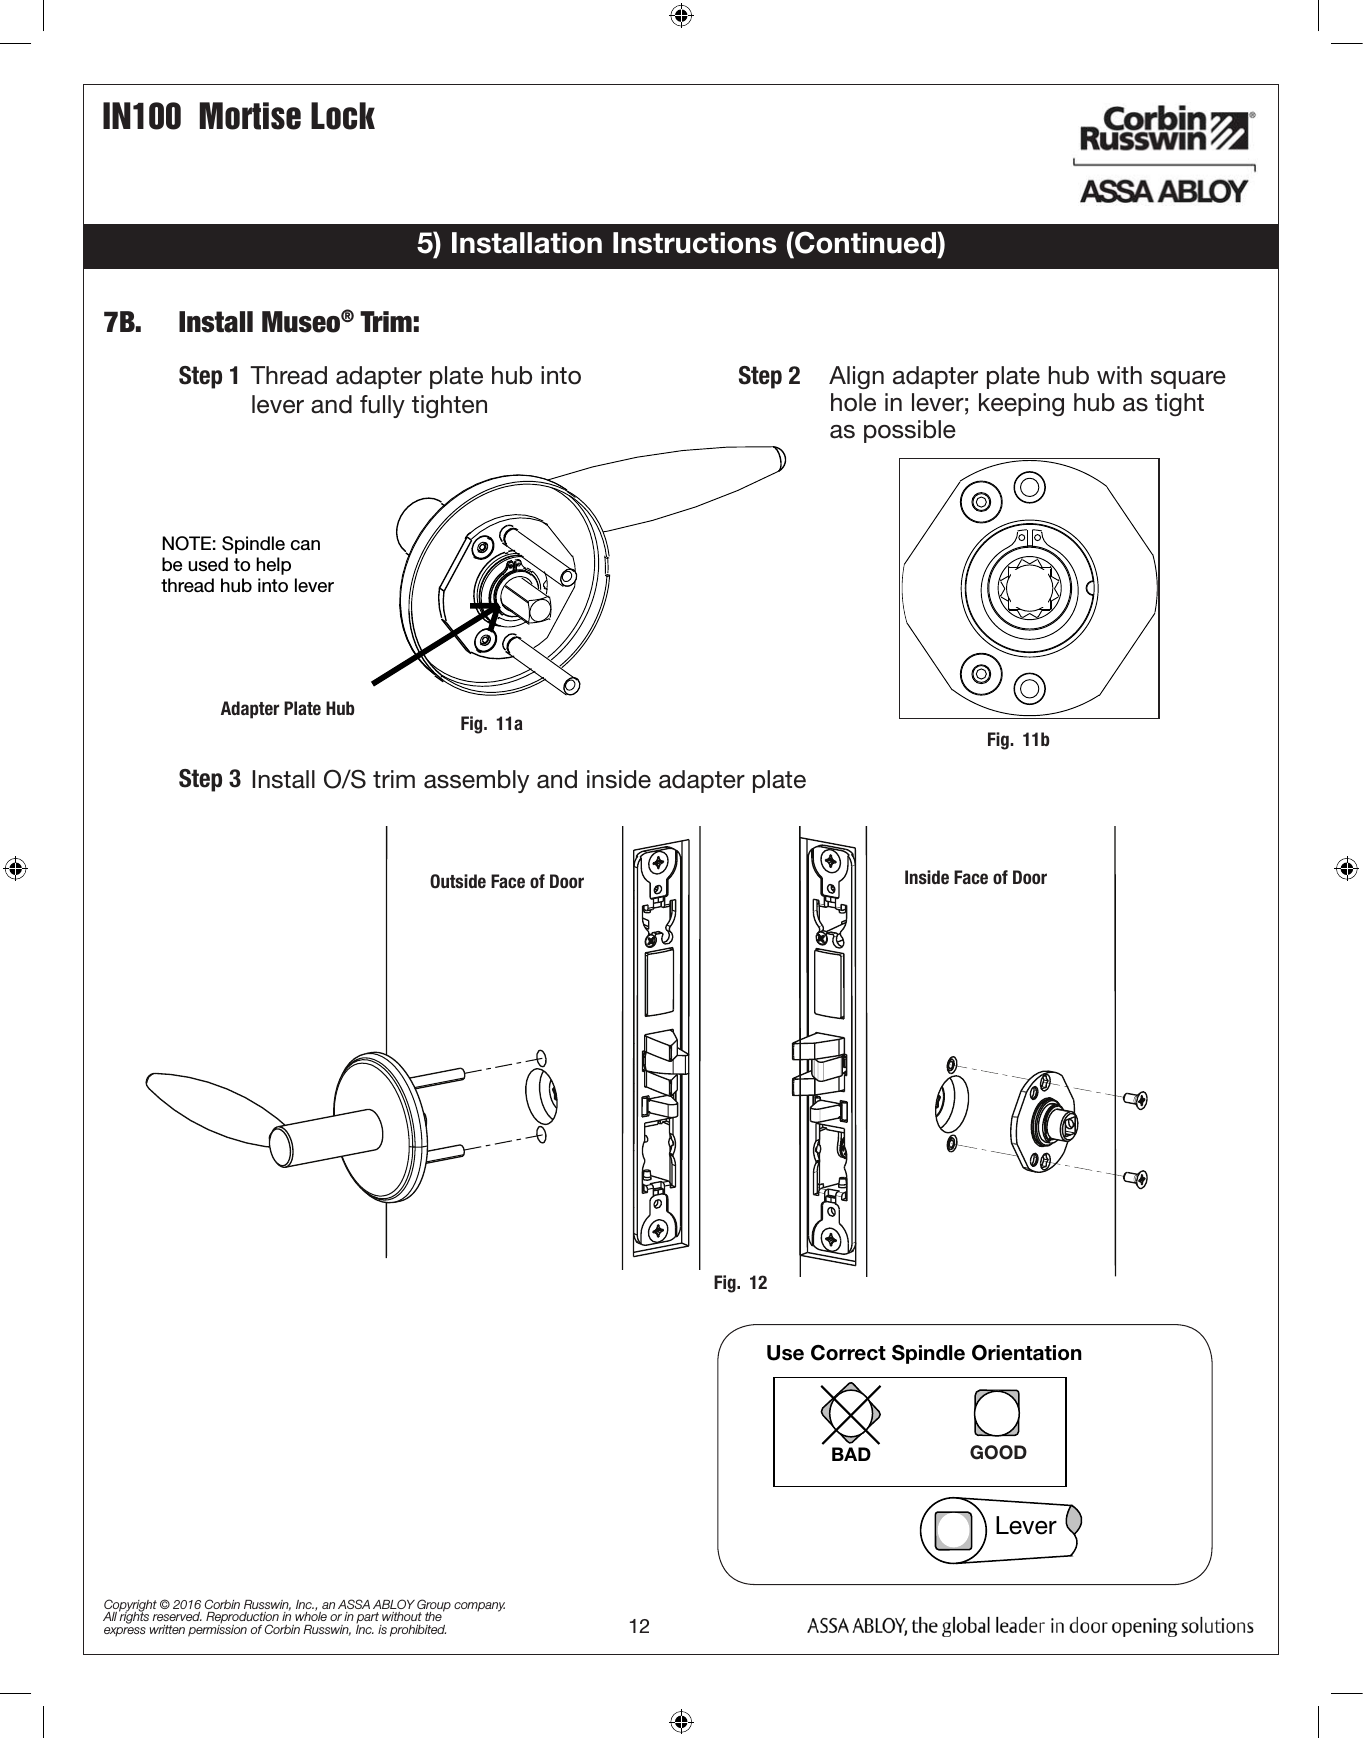 IN100  Mortise Lock12Copyright © 2016 Corbin Russwin, Inc., an ASSA ABLOY Group company. All rights reserved. Reproduction in whole or in part without the express written permission of Corbin Russwin, Inc. is prohibited.NOTE: Spindle can be used to help thread hub into lever  Adapter Plate Hub  Step 1   Thread adapter plate hub into  lever and fully tighten Step 2Install O/S trim assembly and inside adapter plate Step 37B.   Install Museo® Trim:5) Installation Instructions (Continued)Use Correct Spindle Orientation  BAD GOOD  Lever  Outside Face of DoorAlign adapter plate hub with square  hole in lever; keeping hub as tight      as possible  Inside Face of DoorFig.  11a Fig.  11bFig.  12